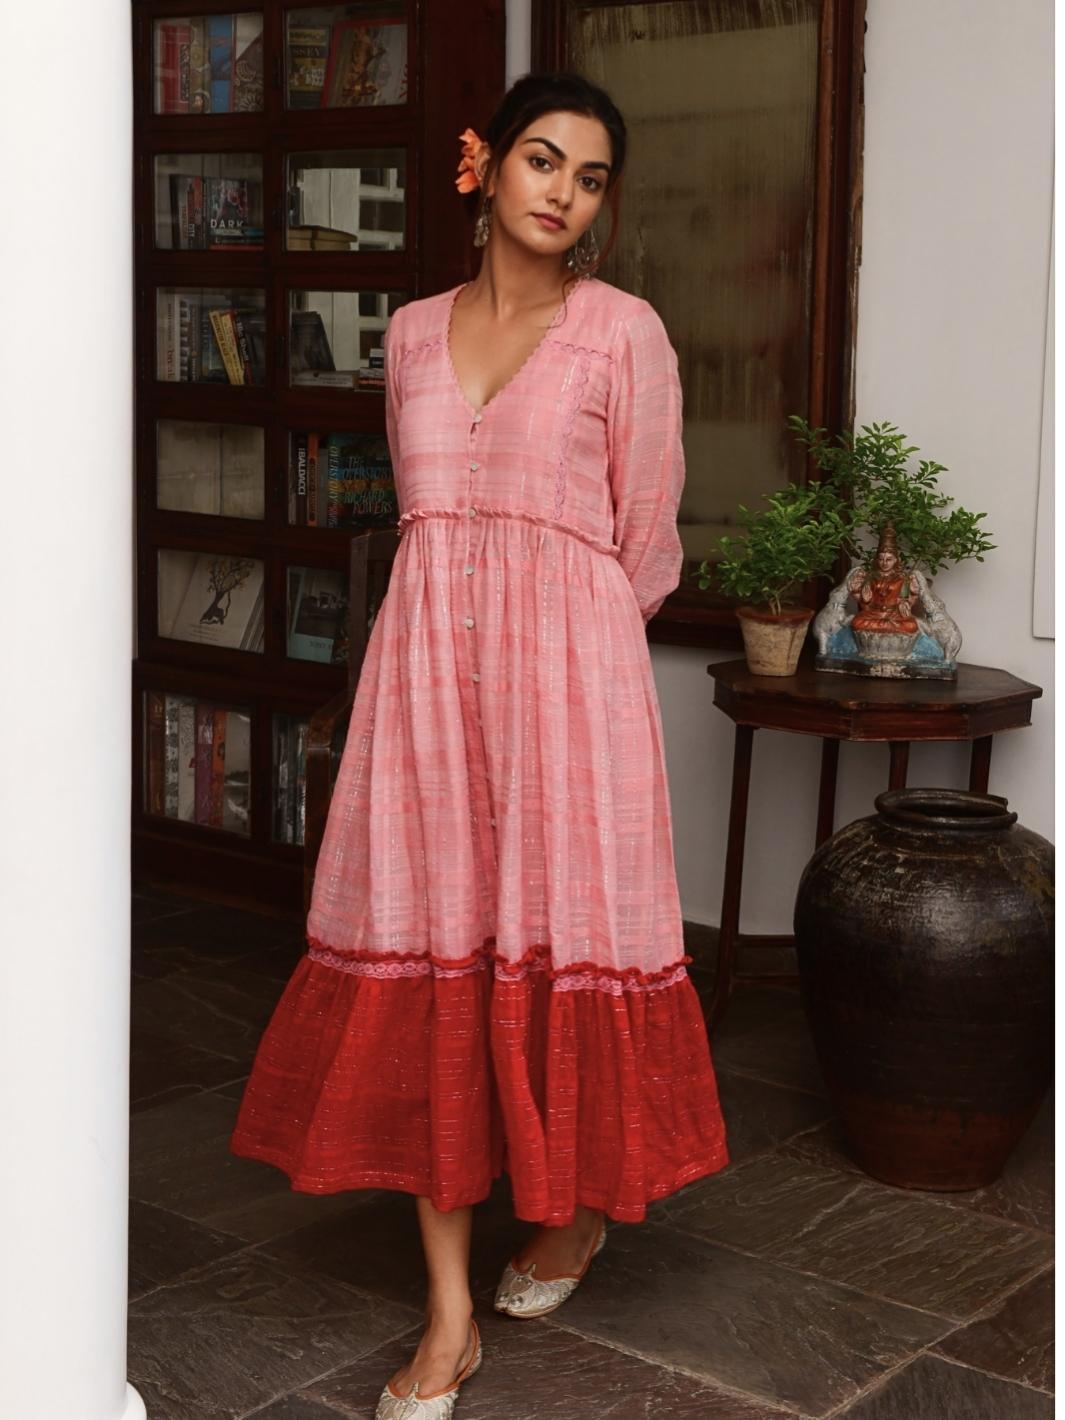 Soft Pink & Red Cotton Lurex Ethnic Dress with Lace-Details - Myaara